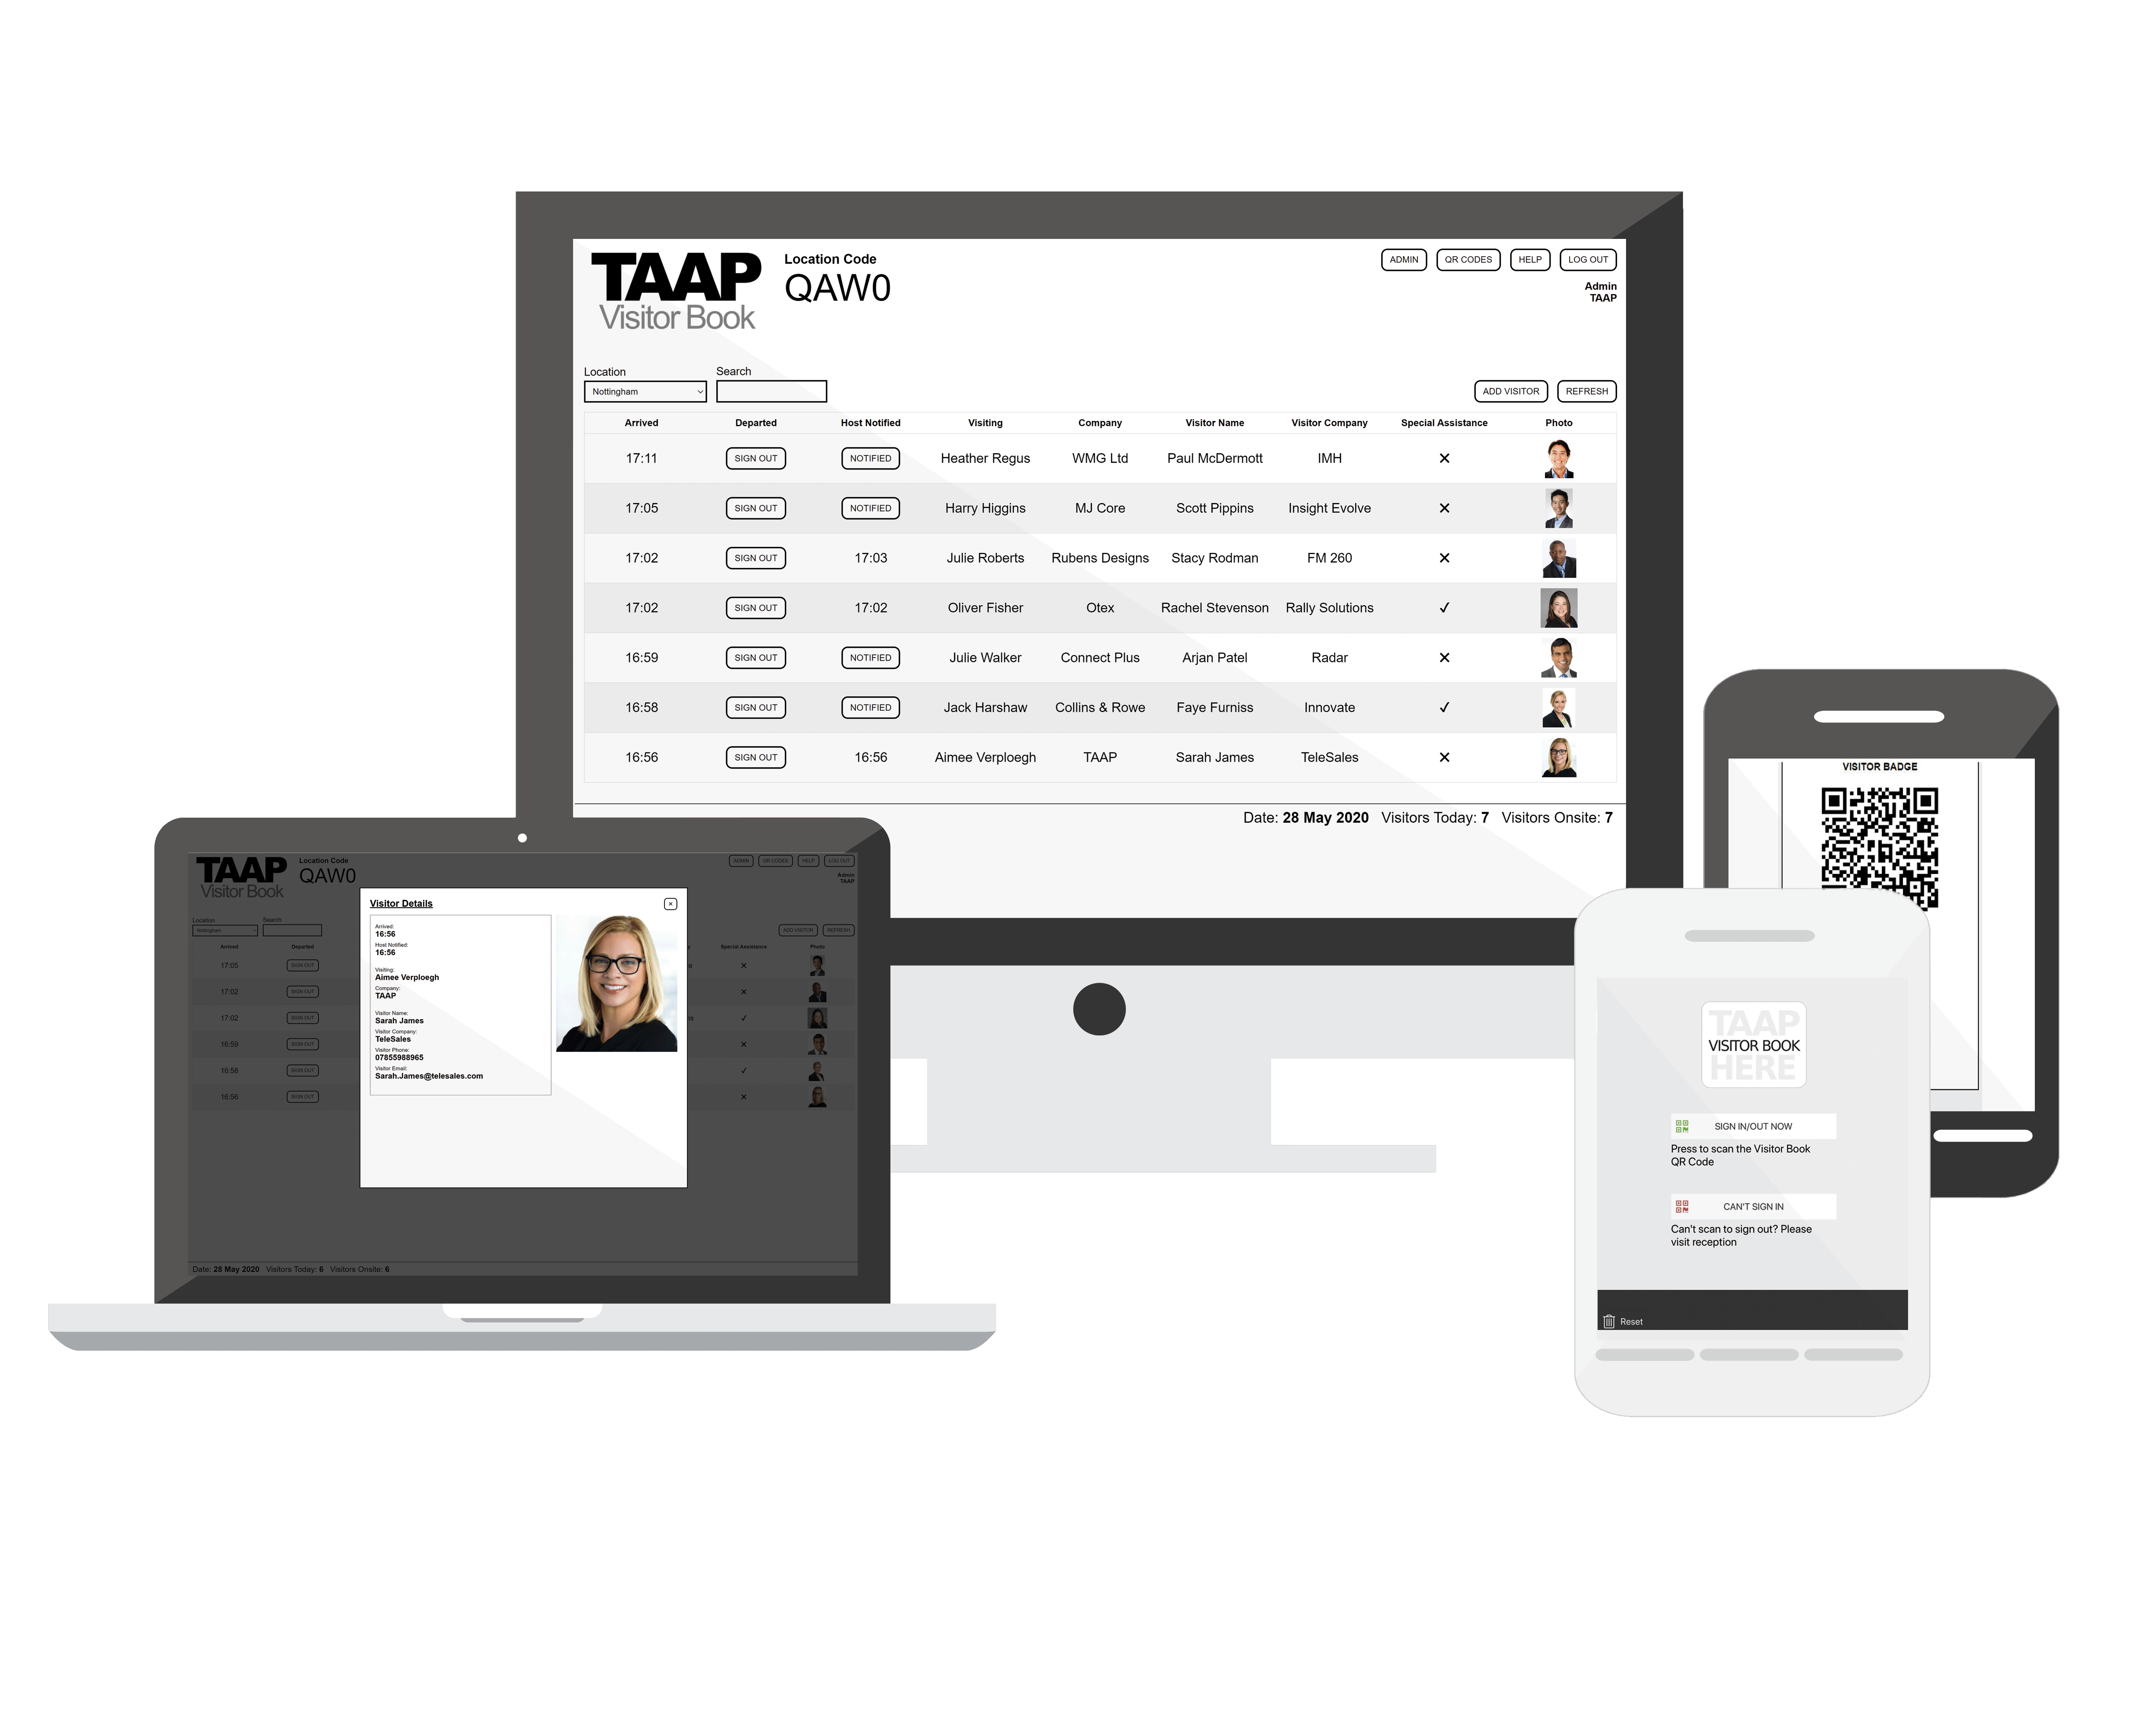 TAAP Visitor Book Screenshots within devices